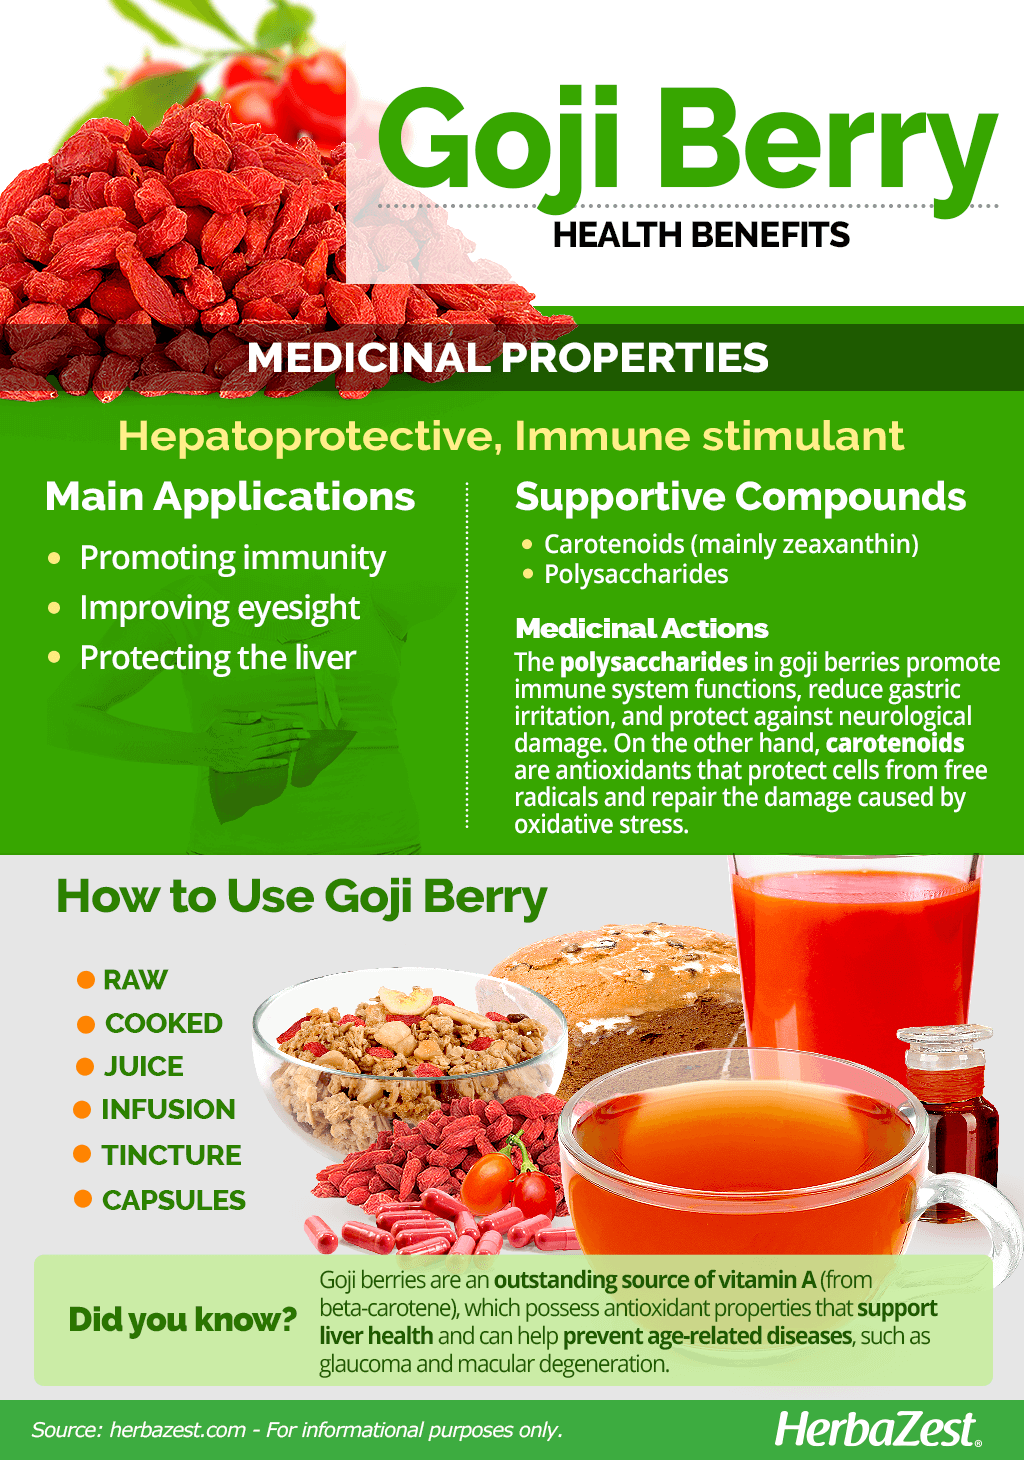 All About Goji Berry